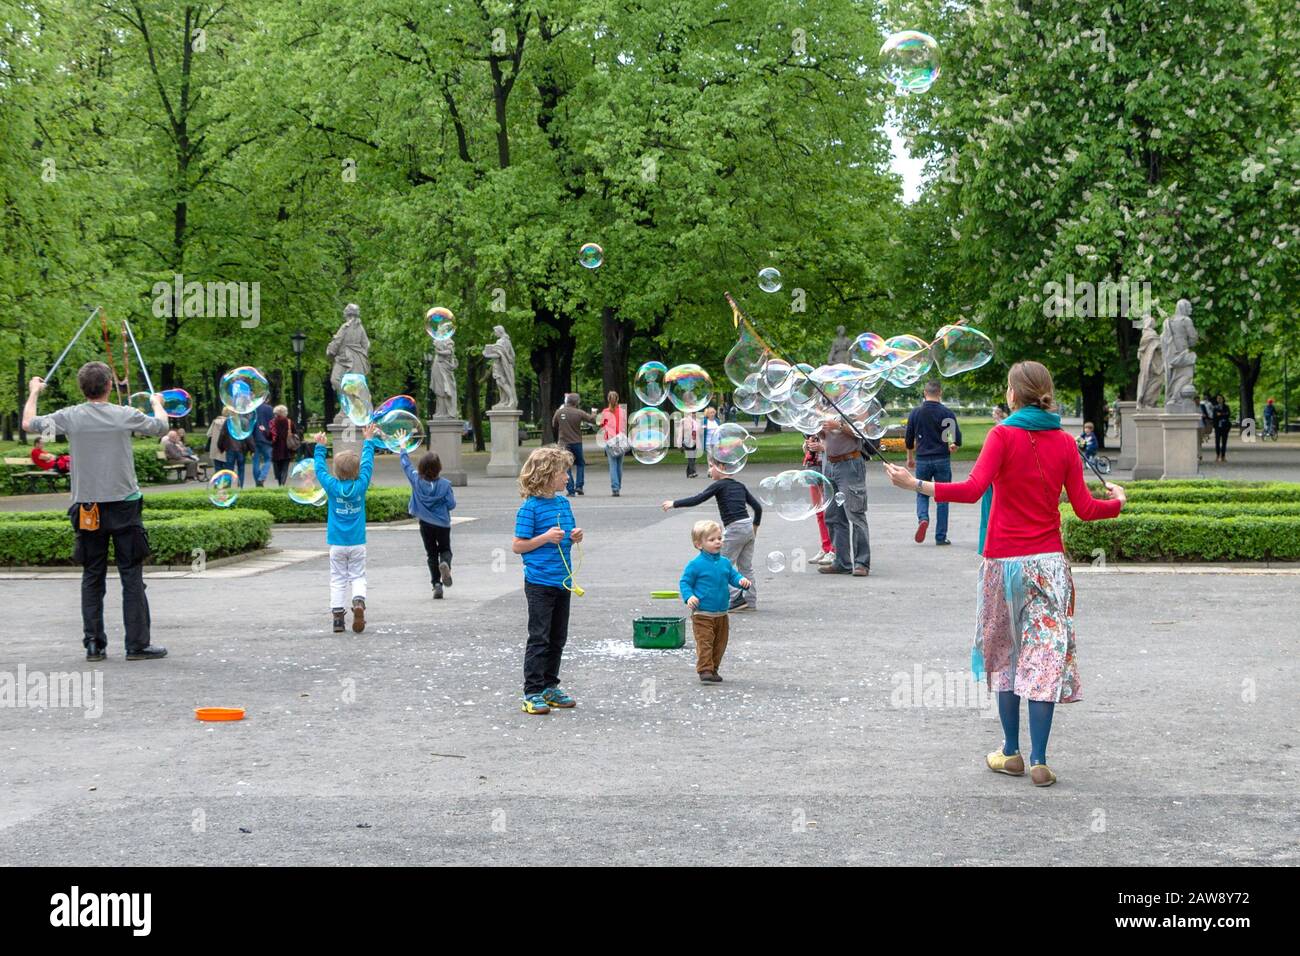 People and chidlren playing with bubbles in the Saxon Garden of Warsaw, Poland on a spring day Stock Photo